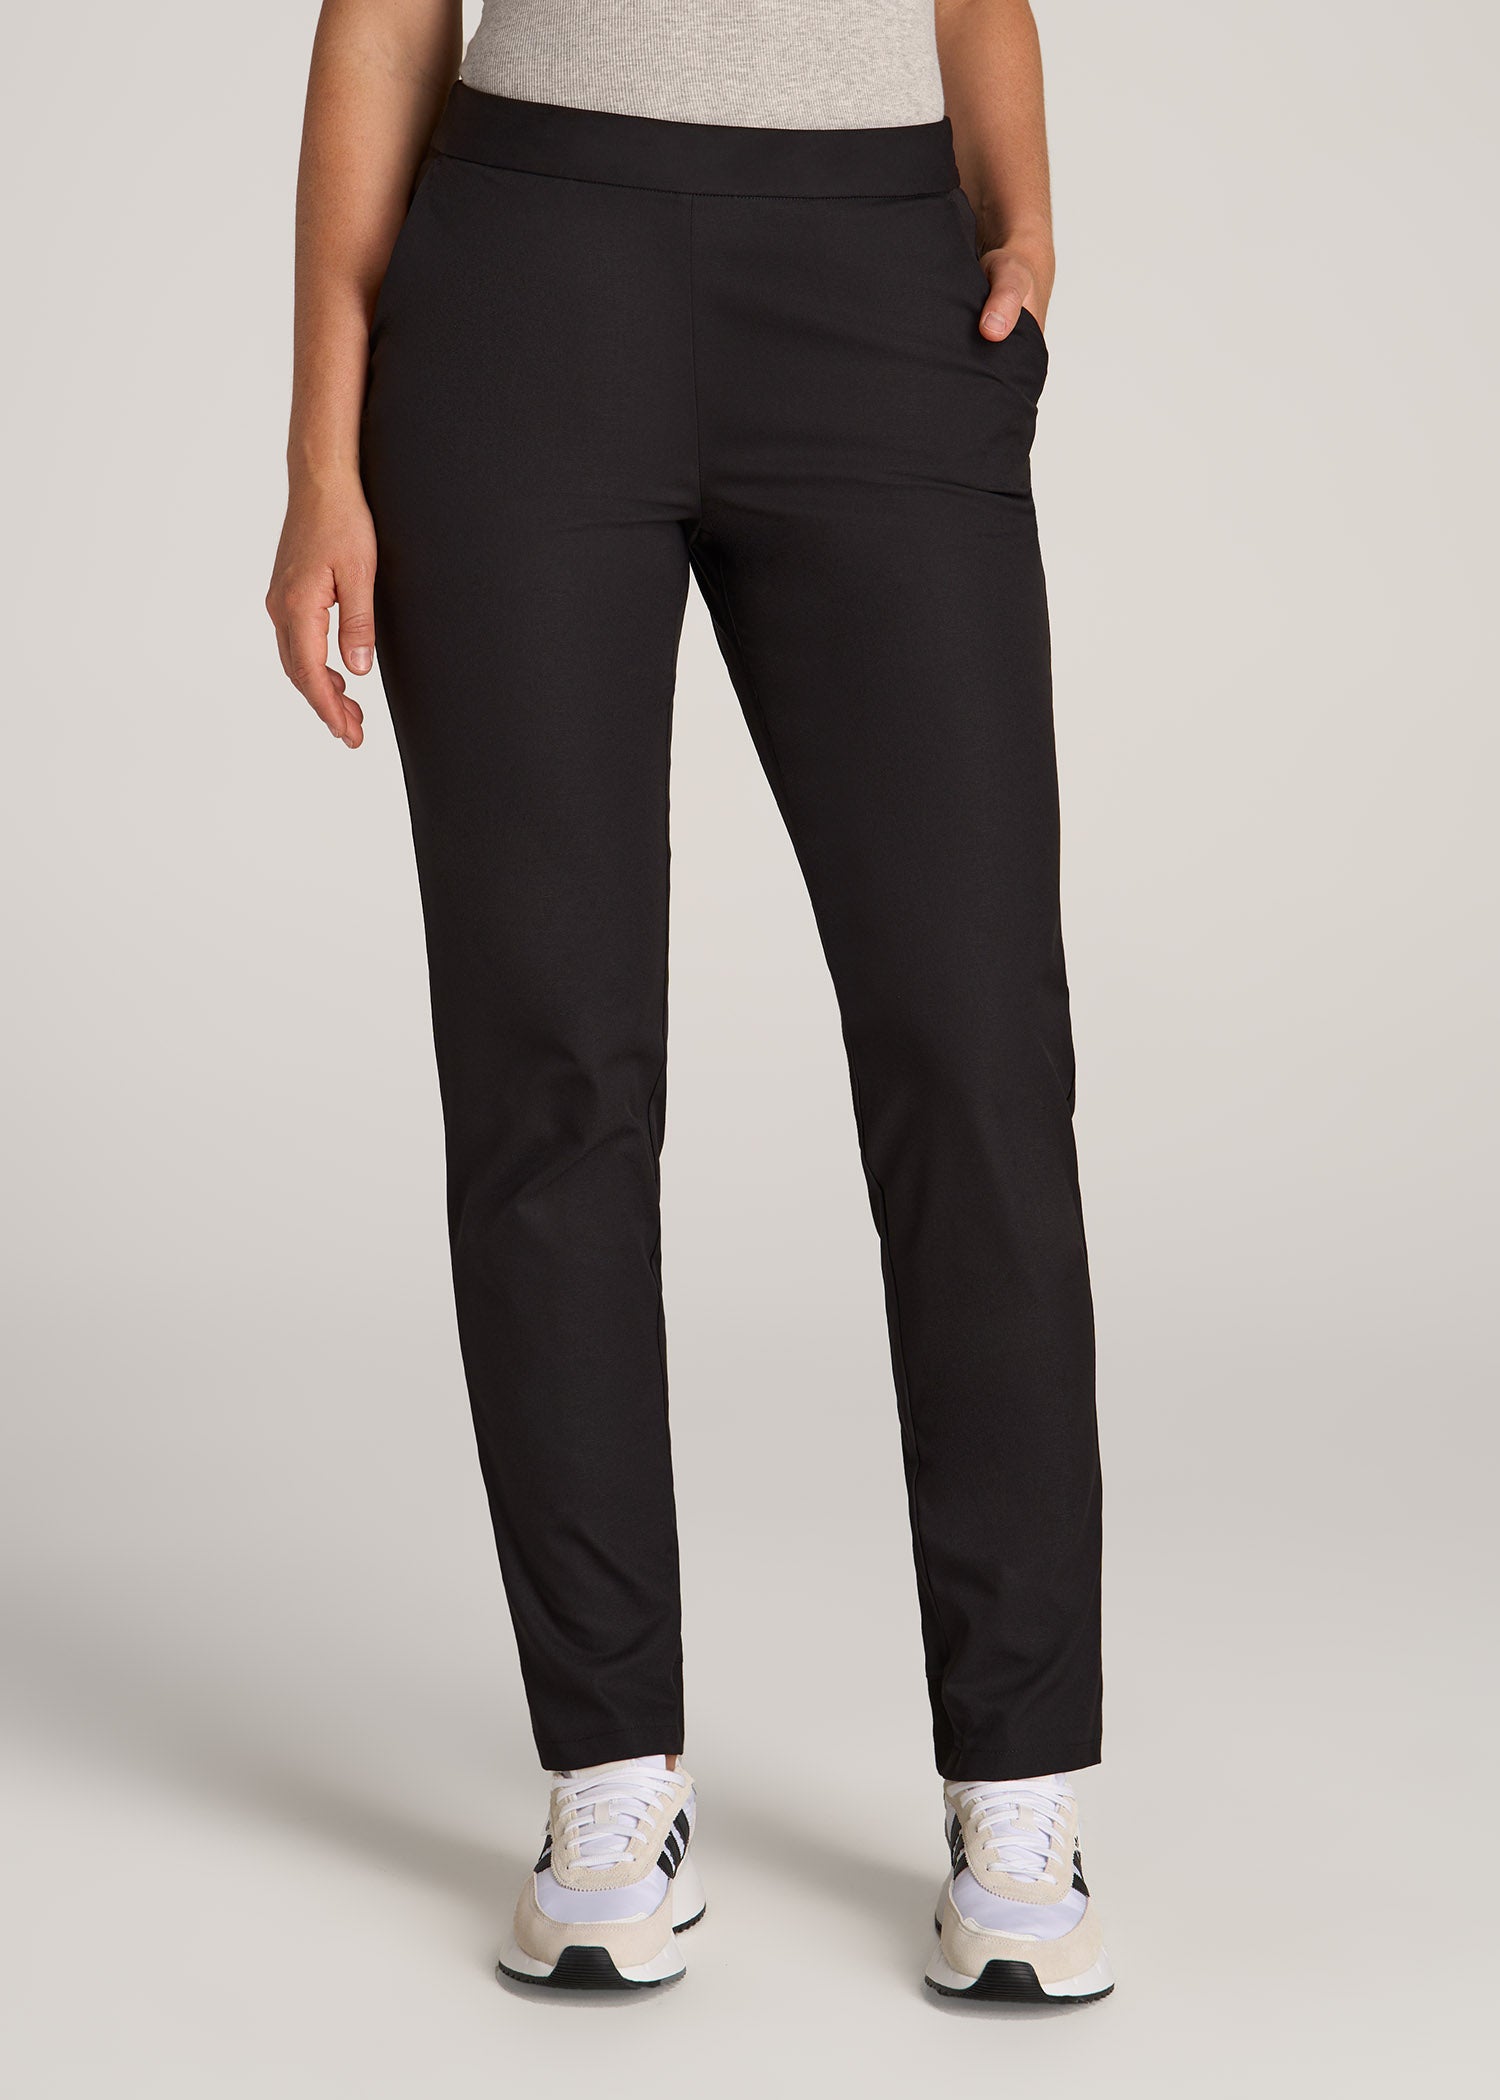 Pull-on Traveler Pants 2.0 for Tall Women | American Tall